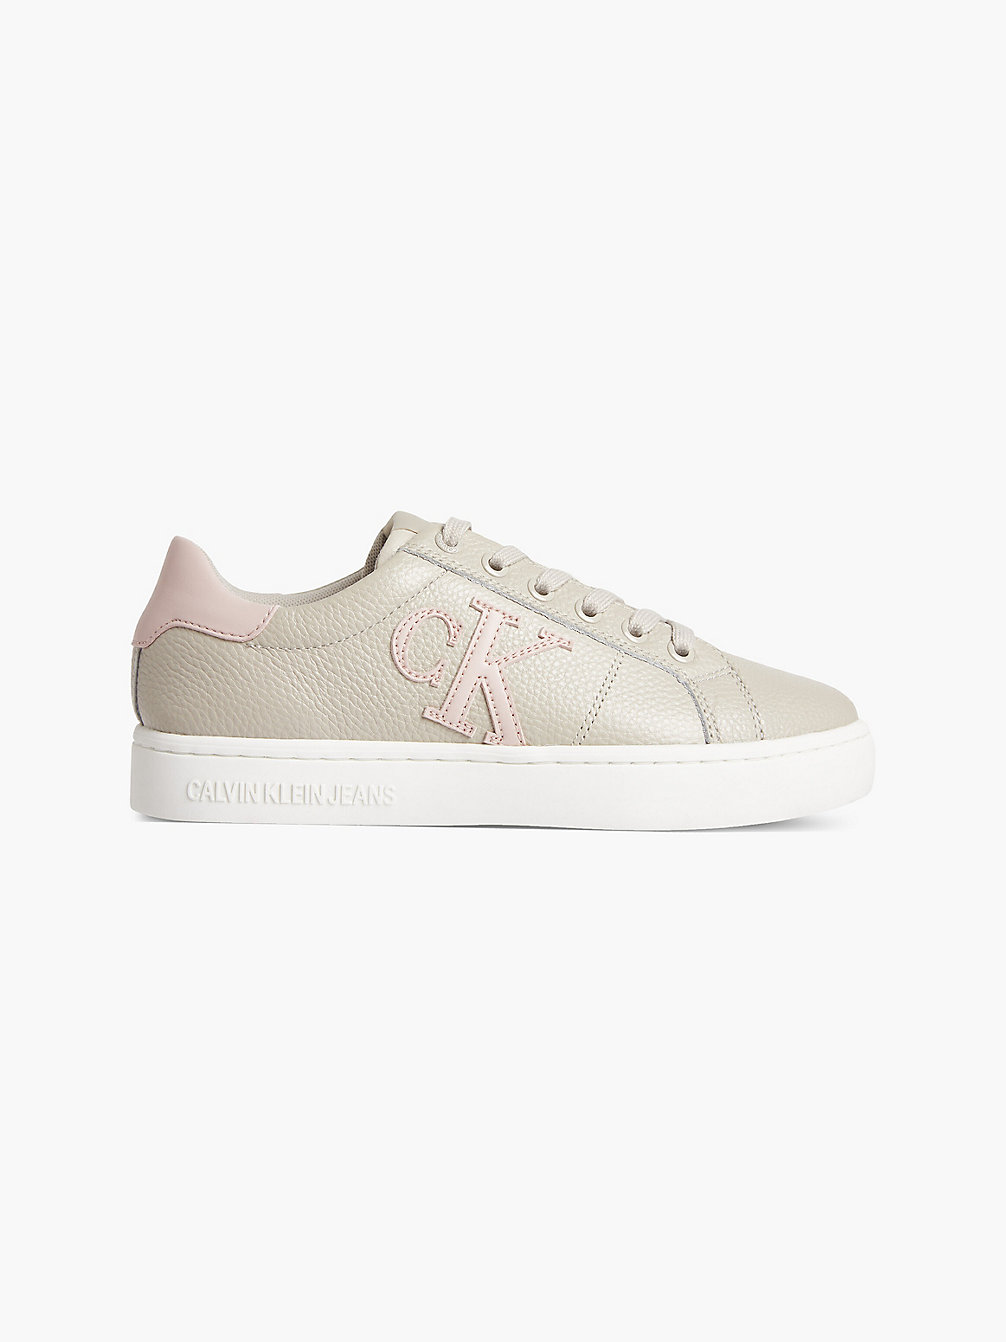 EGGSHELL/PINK BLUSH Leather Trainers undefined women Calvin Klein